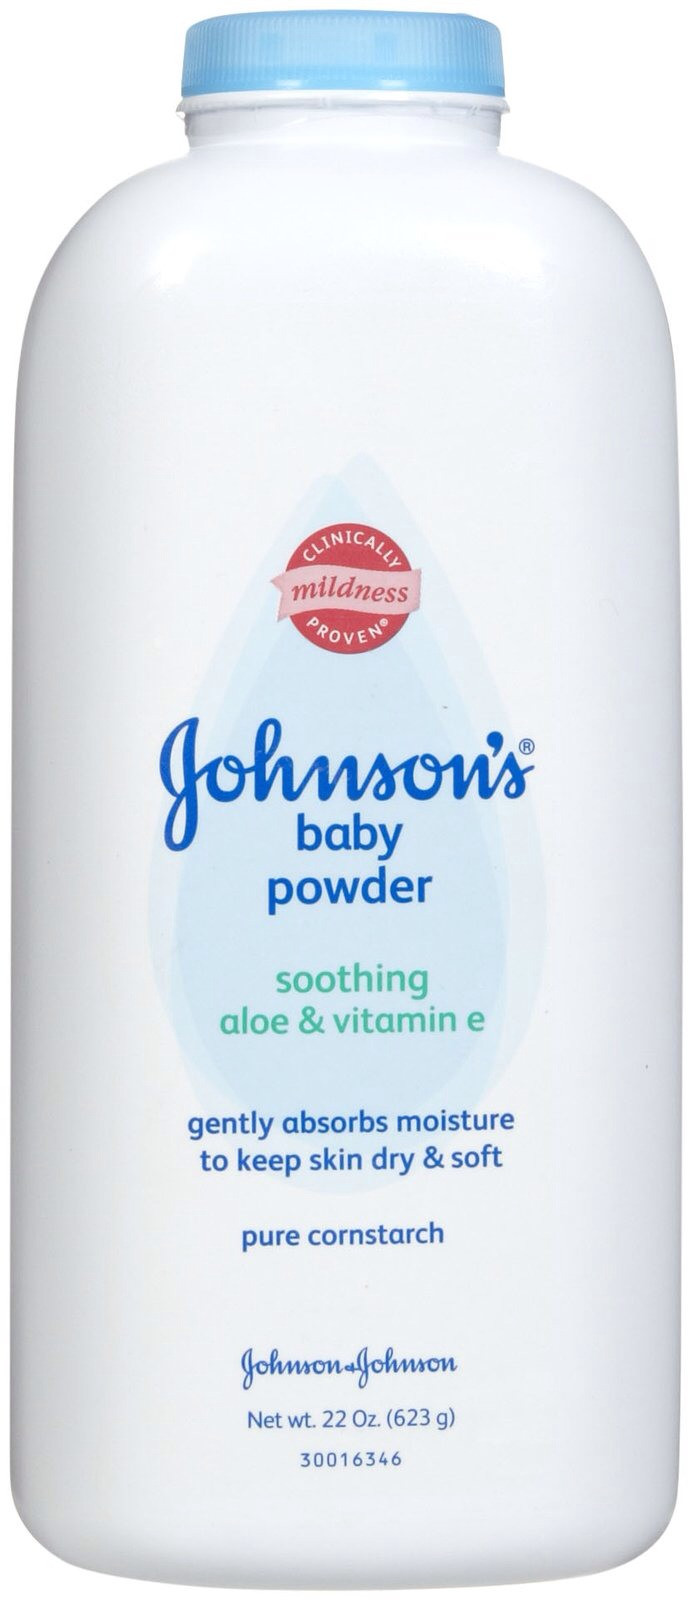 Does Baby Powder Help Greasy Hair
 For People With Greasy Hair